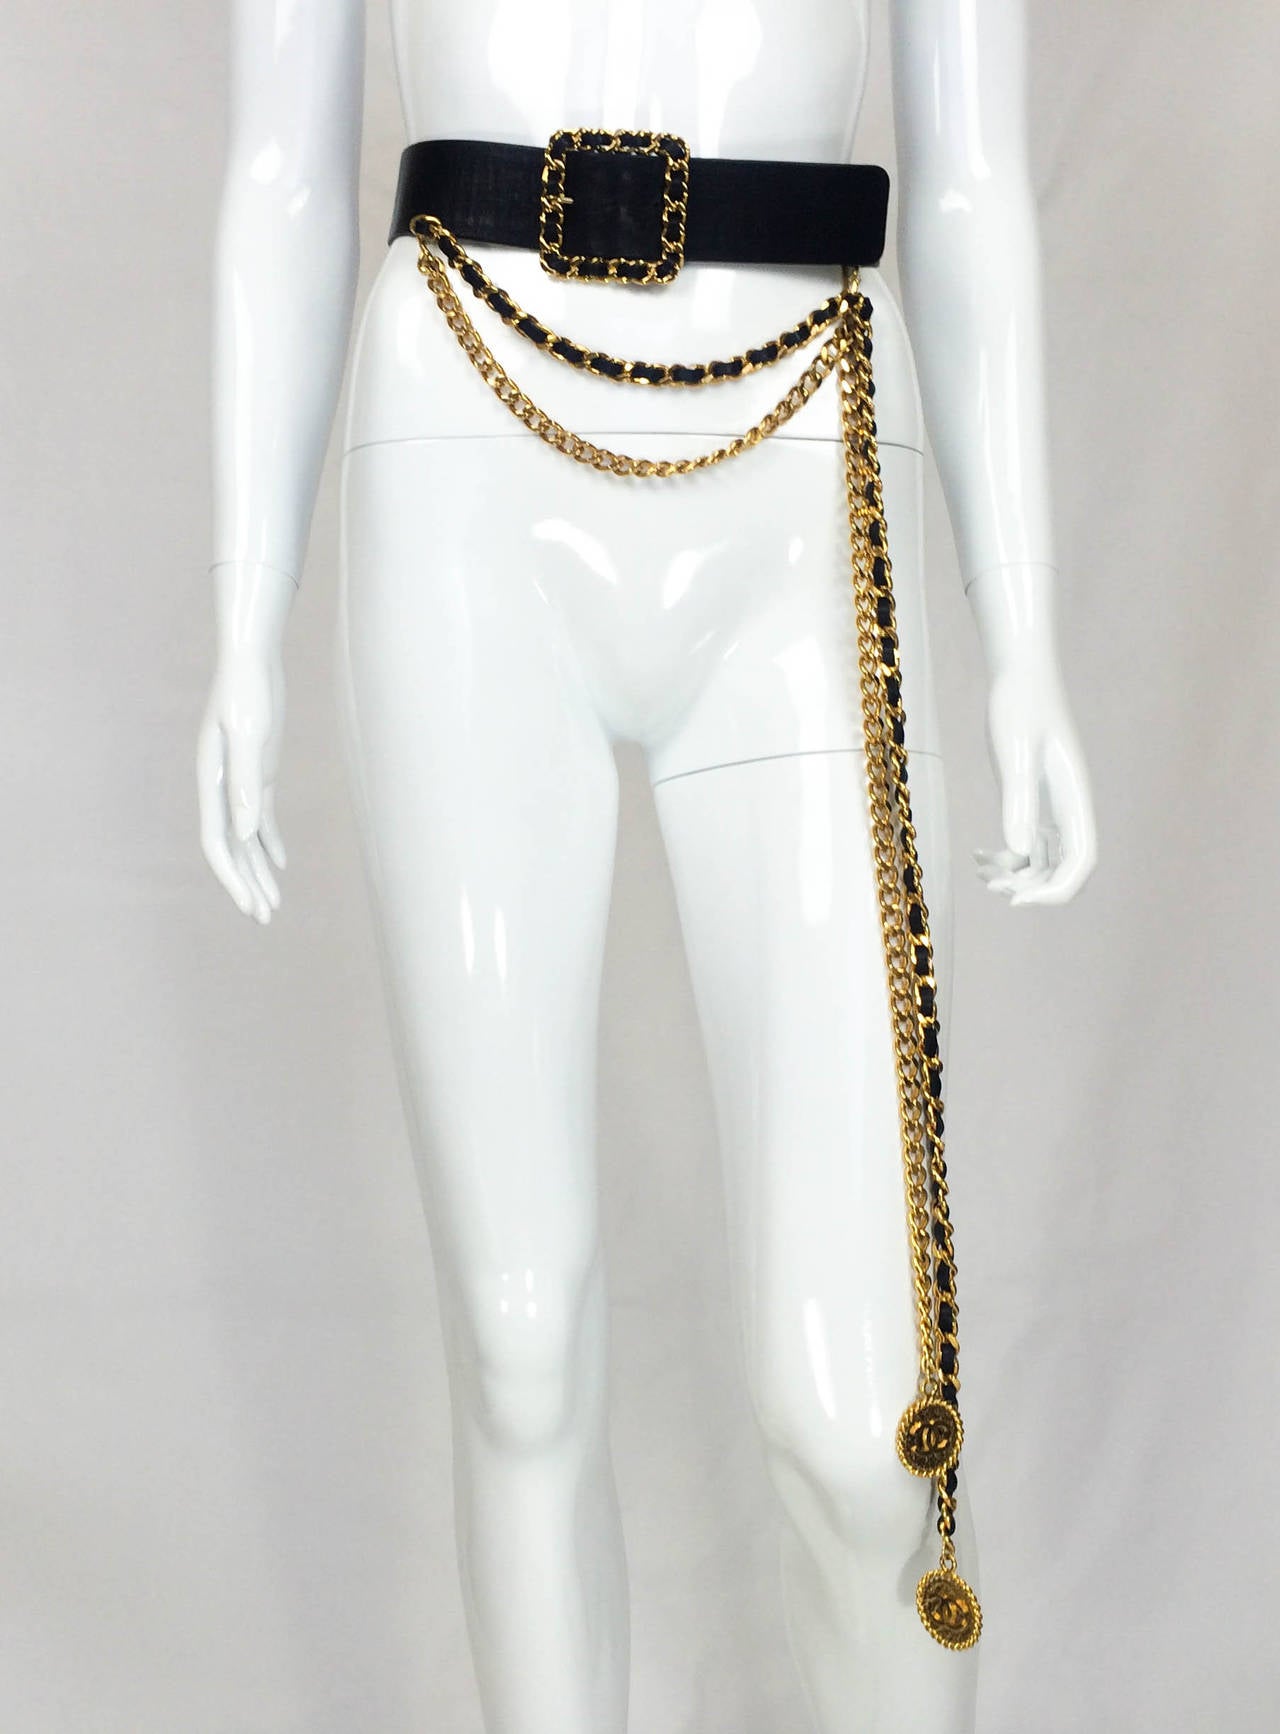 Chanel 1992 Runway Black Leather and Gold Tone Metal Belt In Excellent Condition In London, Chelsea